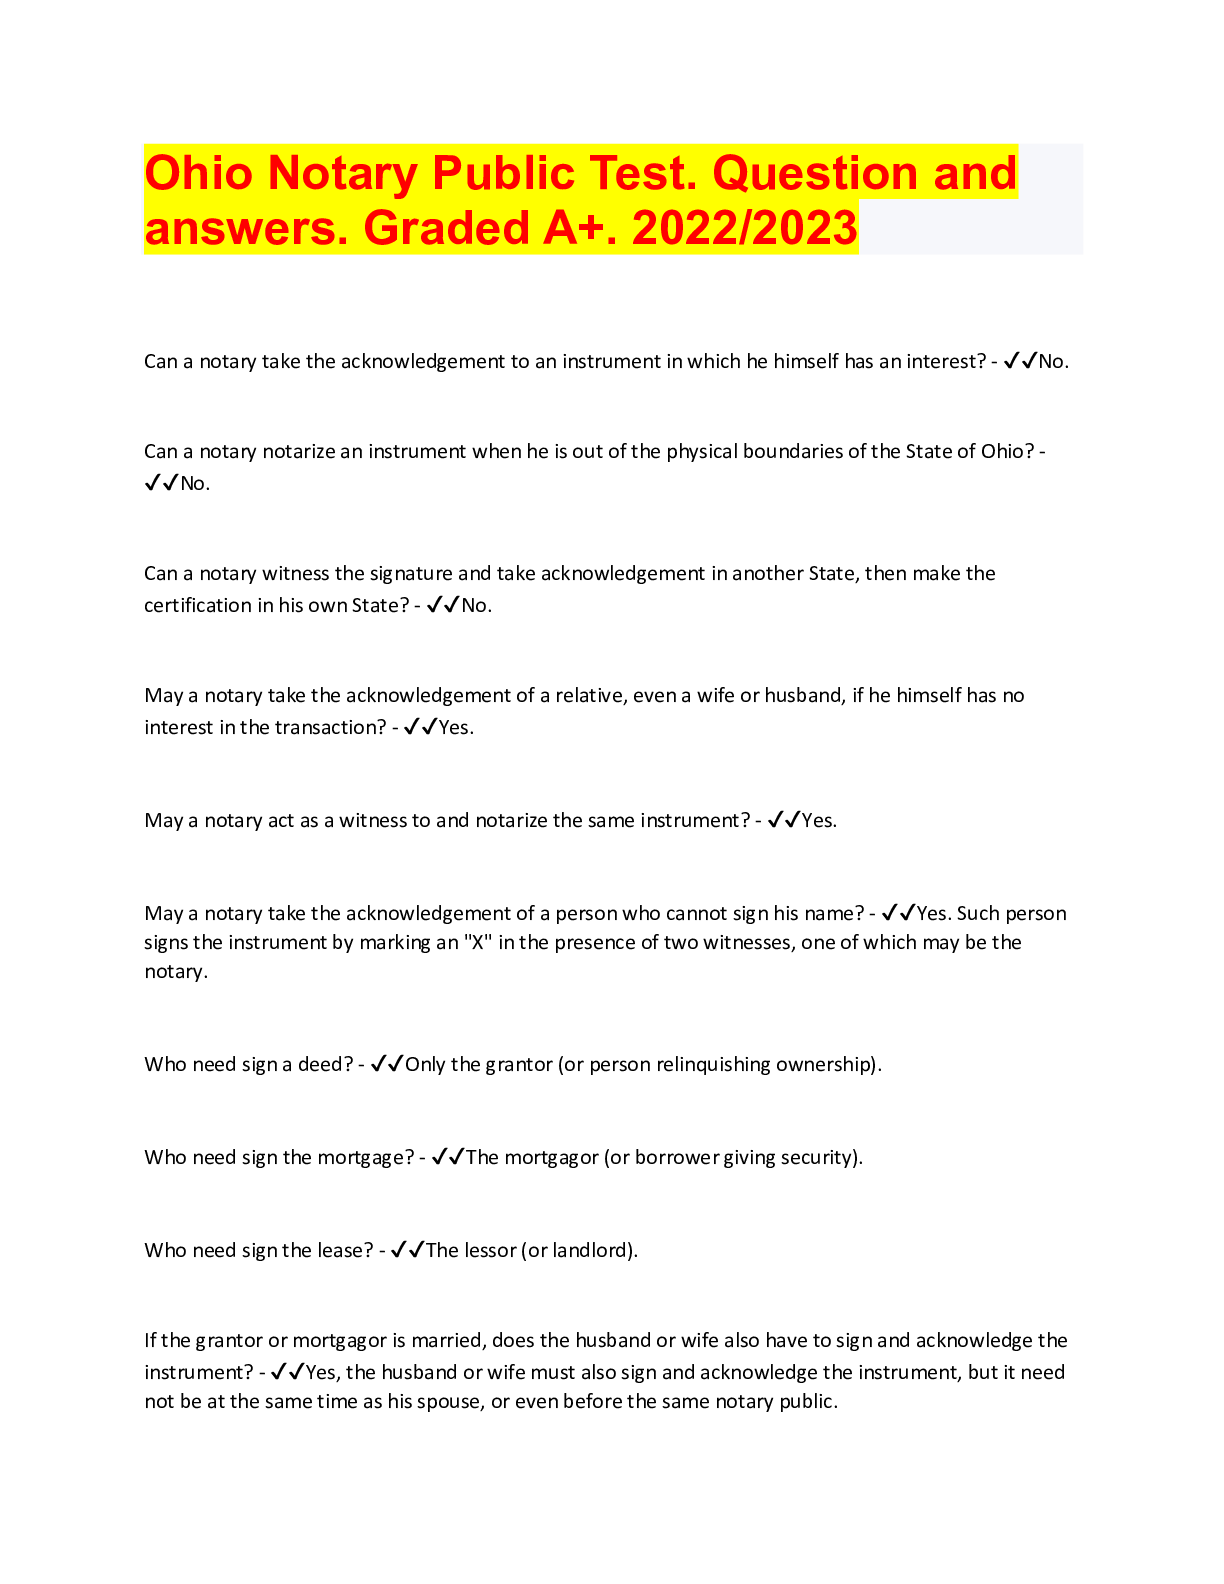 Ohio Notary Public Test. Question and answers. Graded A+. 2022/2023